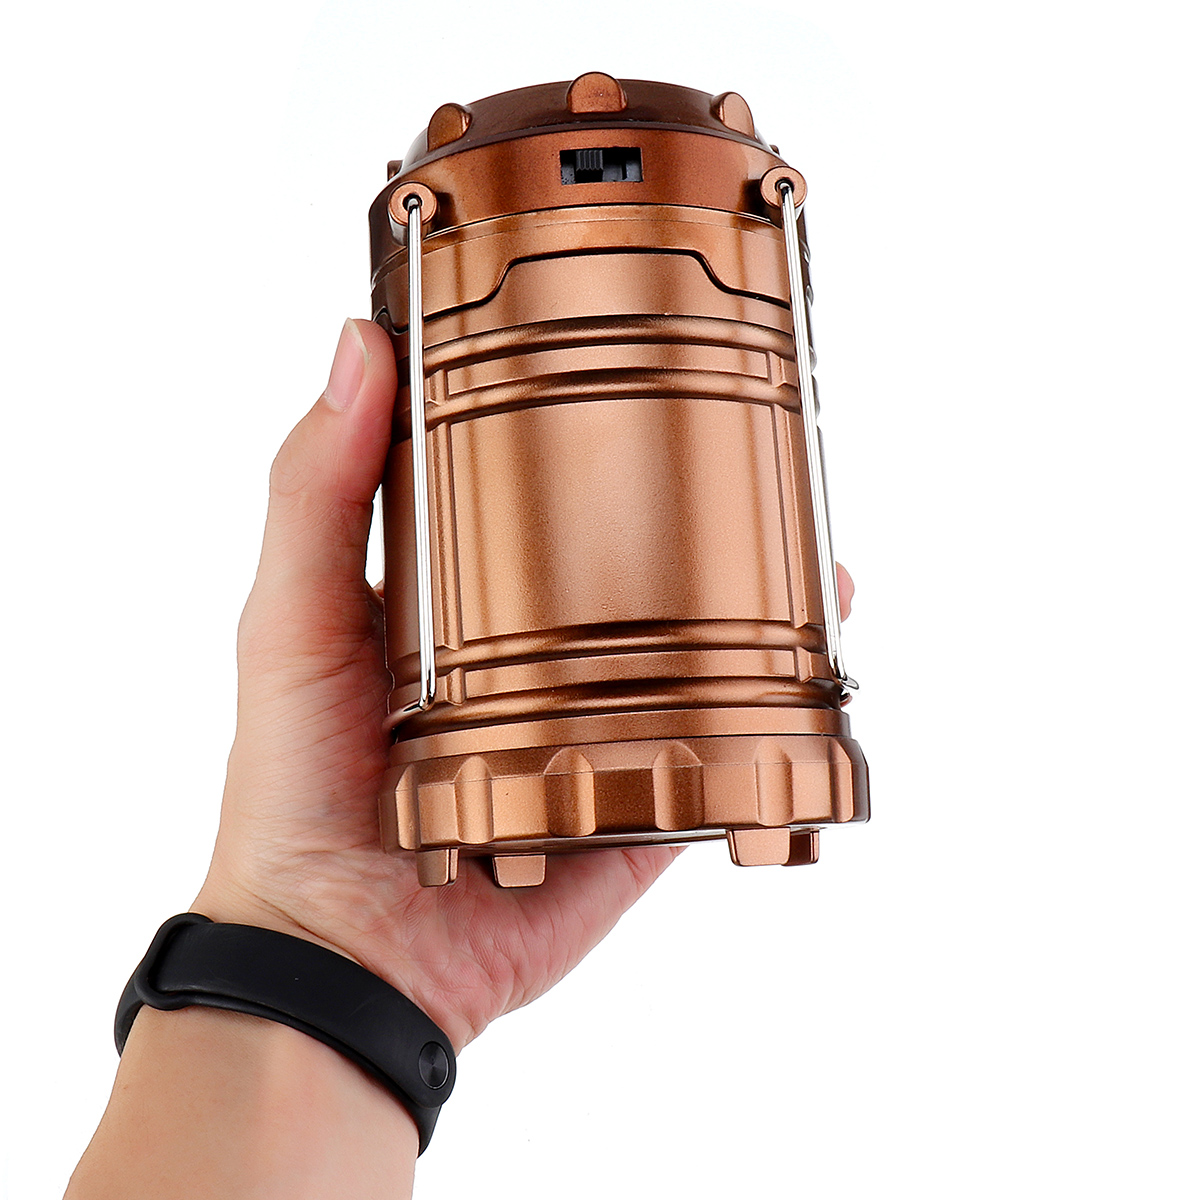 DC-5V-Outdoor-LED-Camping-Lantern-Tent-Ultra-Bright-Collapsible-Mosquito-Insect-Killer-Lamp-Light-1348124-8